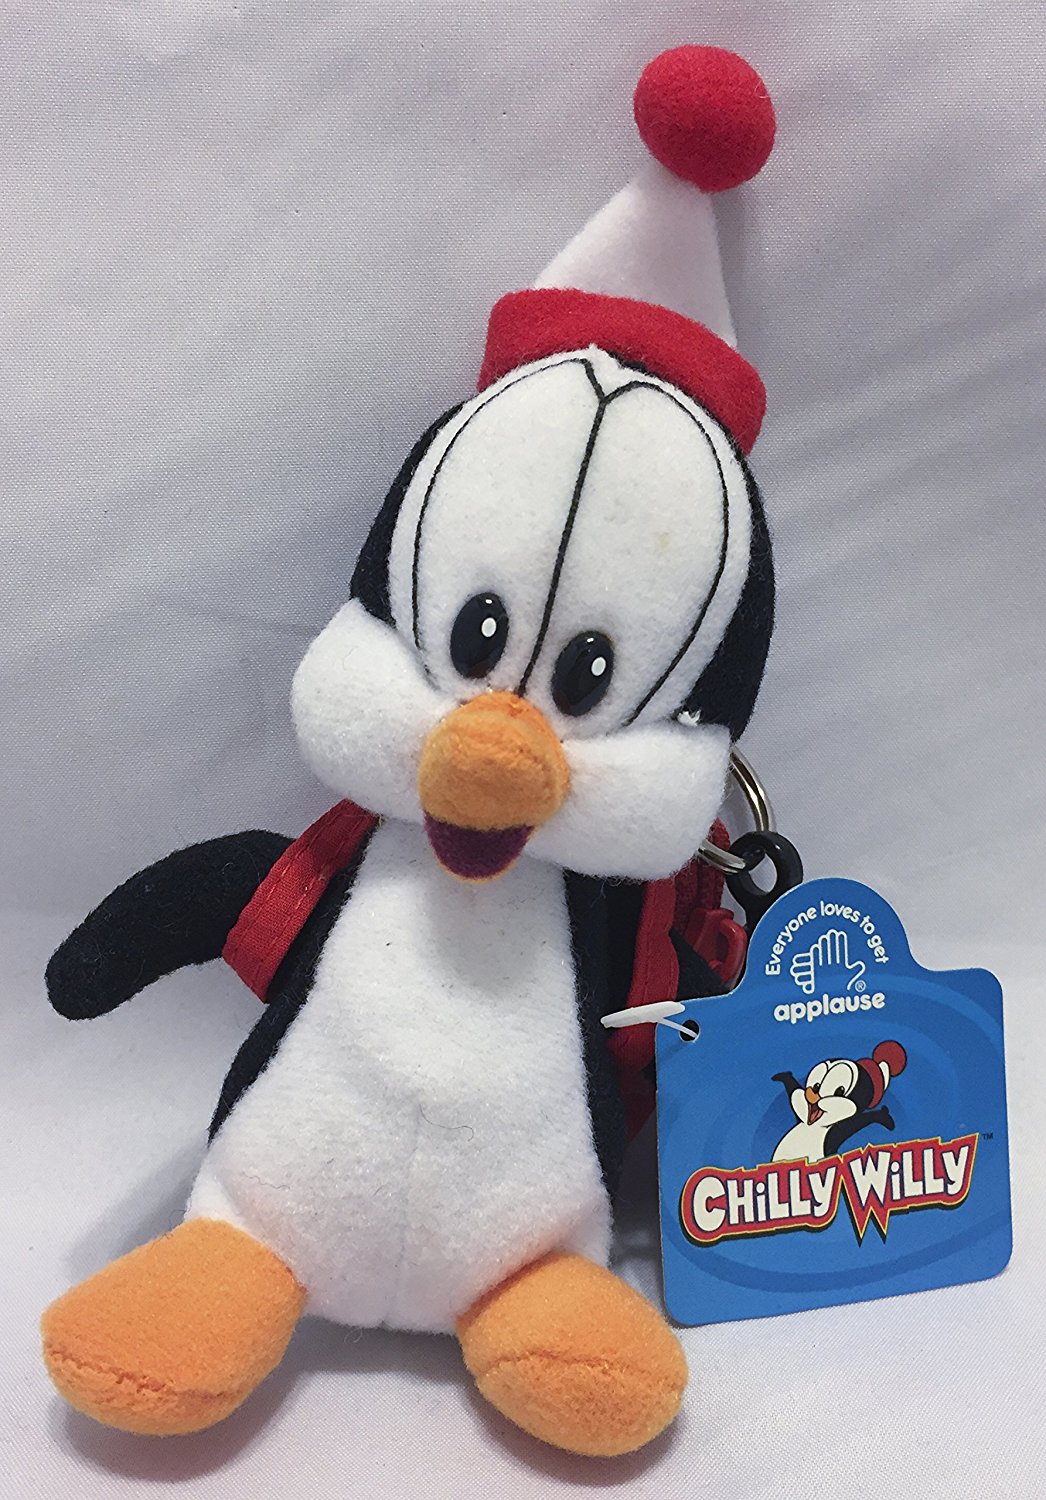 The adorable penguin Chilly Willy has been made into a keychain clip on. His little backpack can hold change or small treasures.